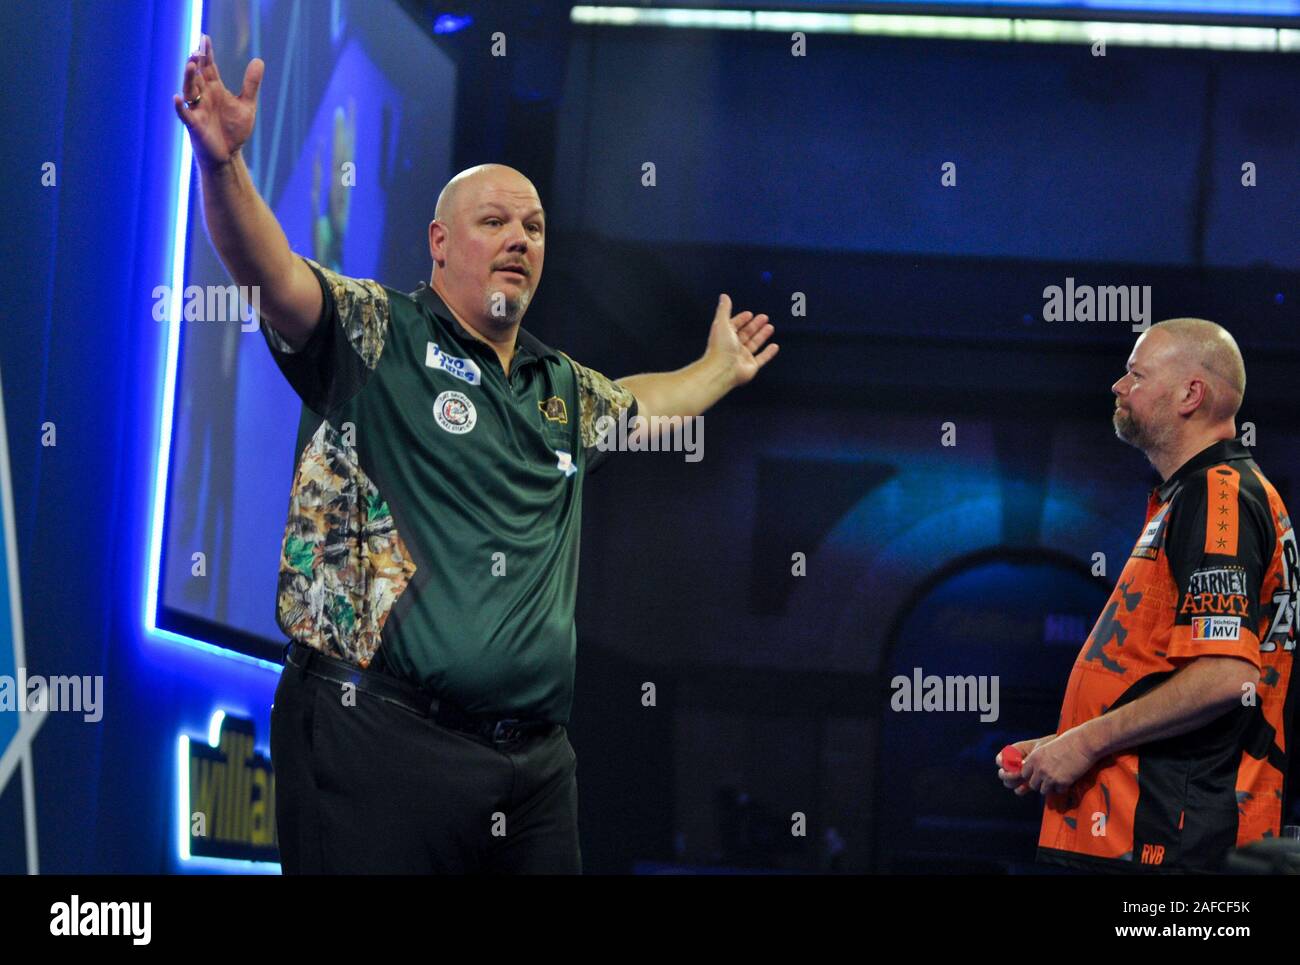 14 december 2019 London, Great Britain William Hill World Darts Championship  Raymond van Barneveld and Darin Young during day 2 of the William Hill  World Darts Championship of darts at Alexandra Palace (